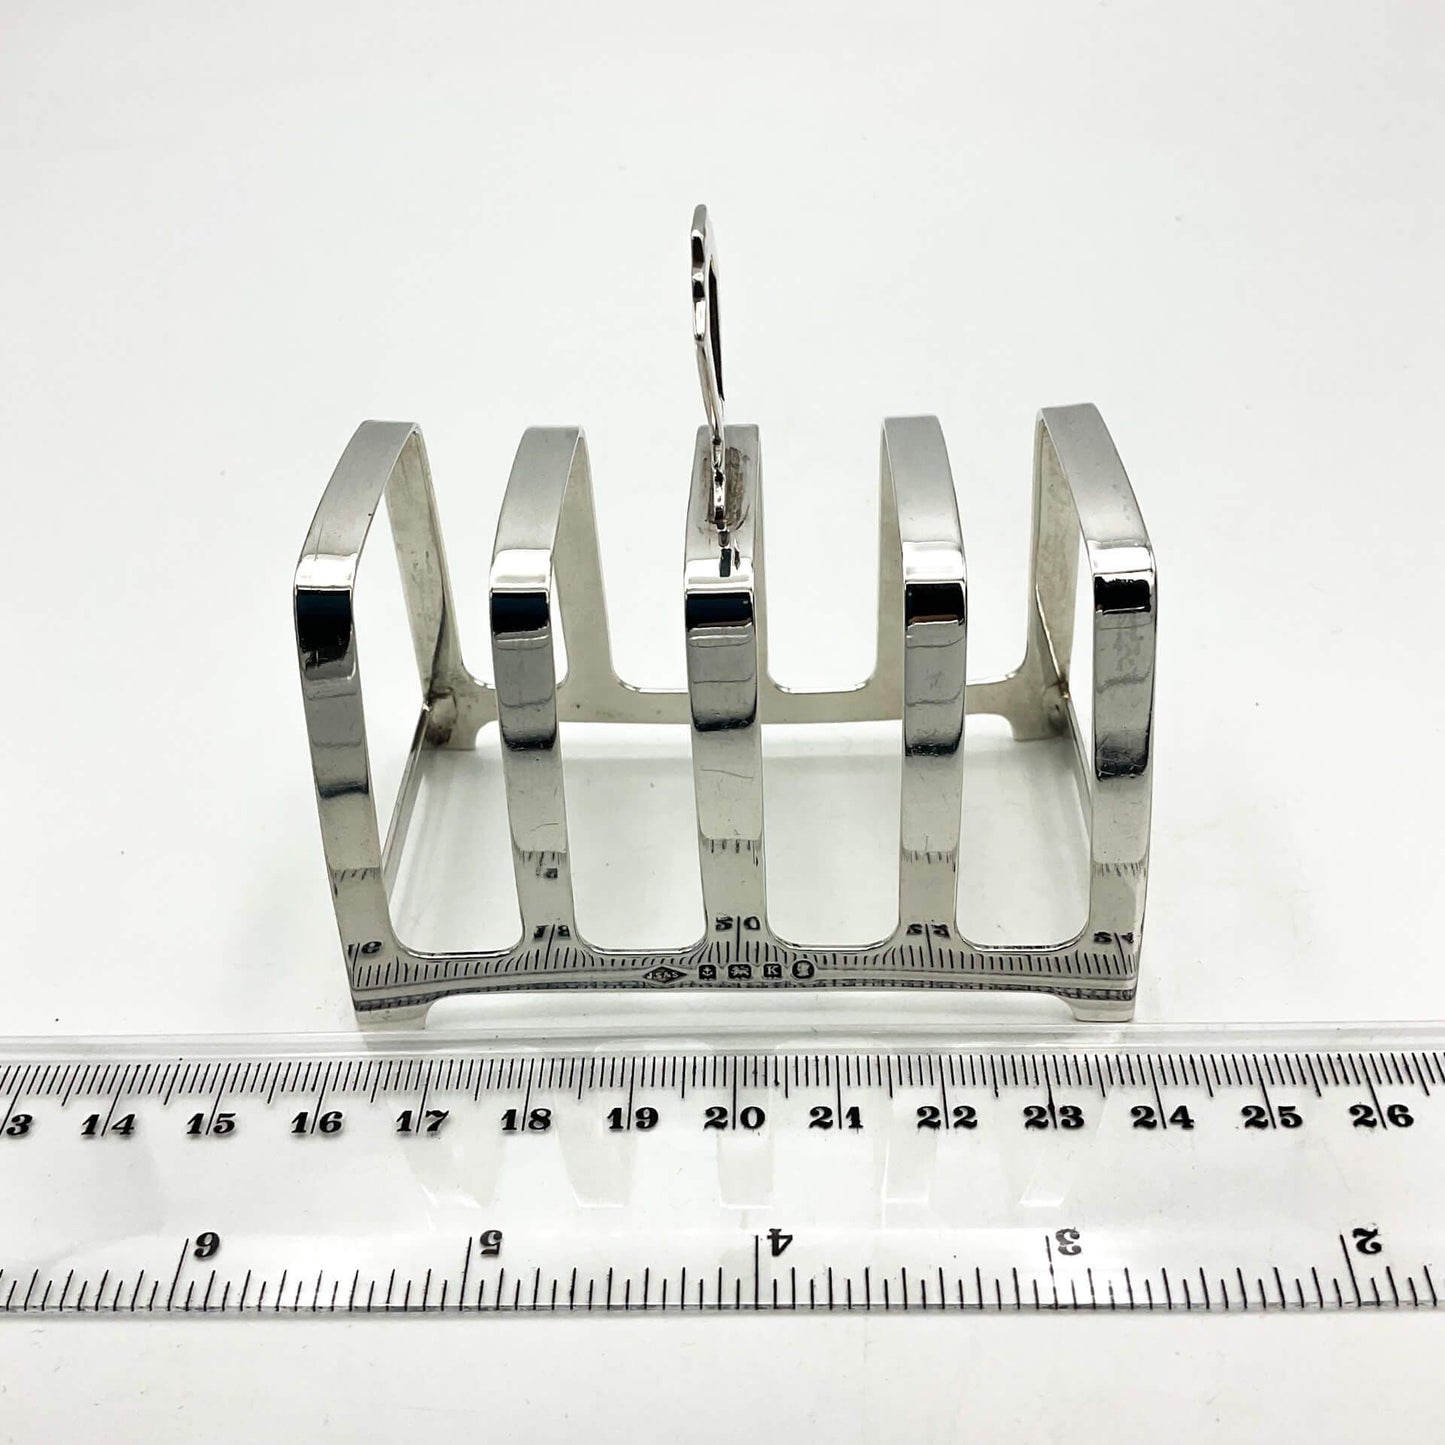 Art deco style silver toast rack on a white background next to ruler measuring 8cm